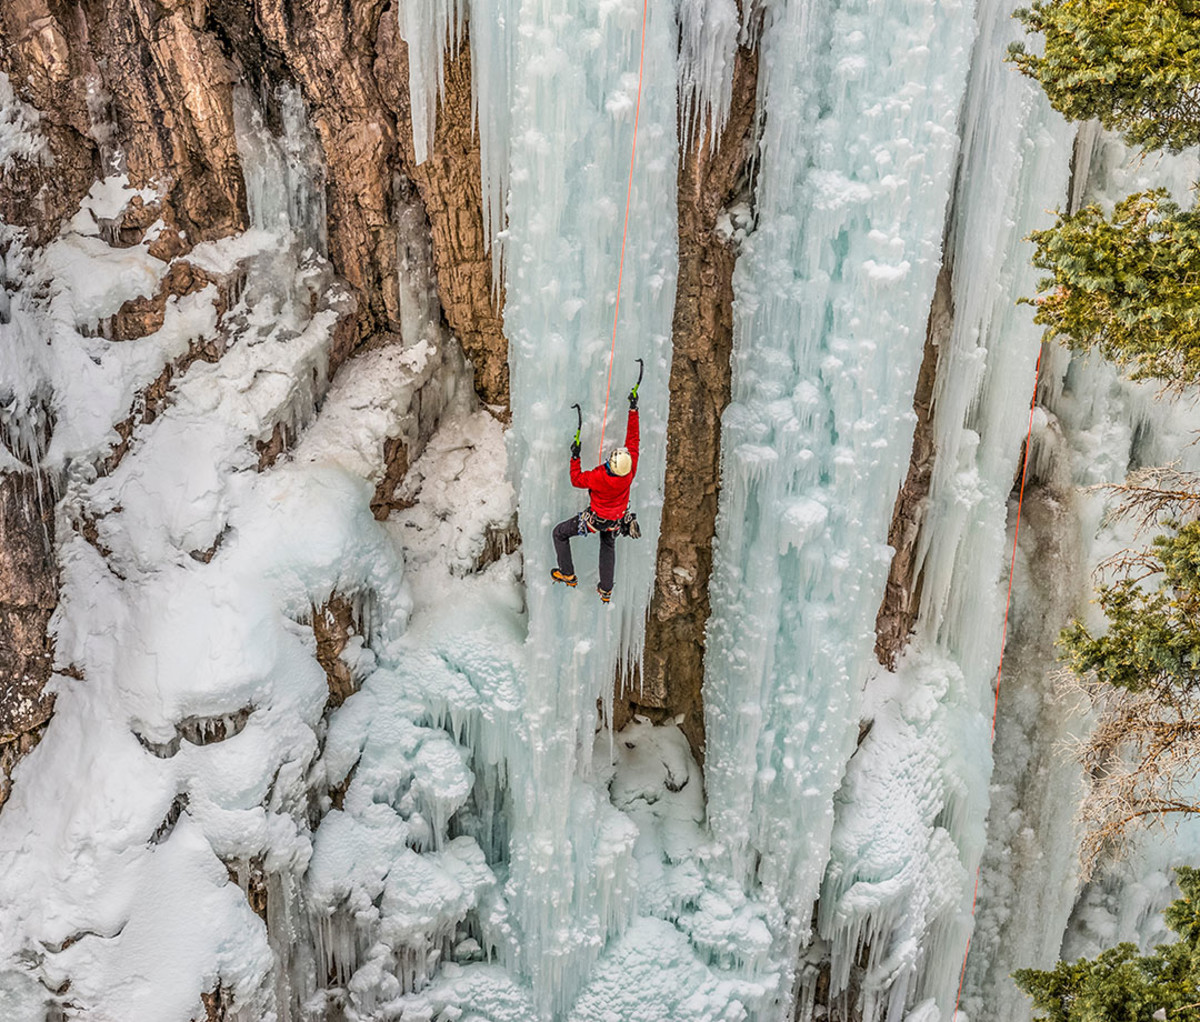 Ice climbing at Ouray Ice Park in Colorado